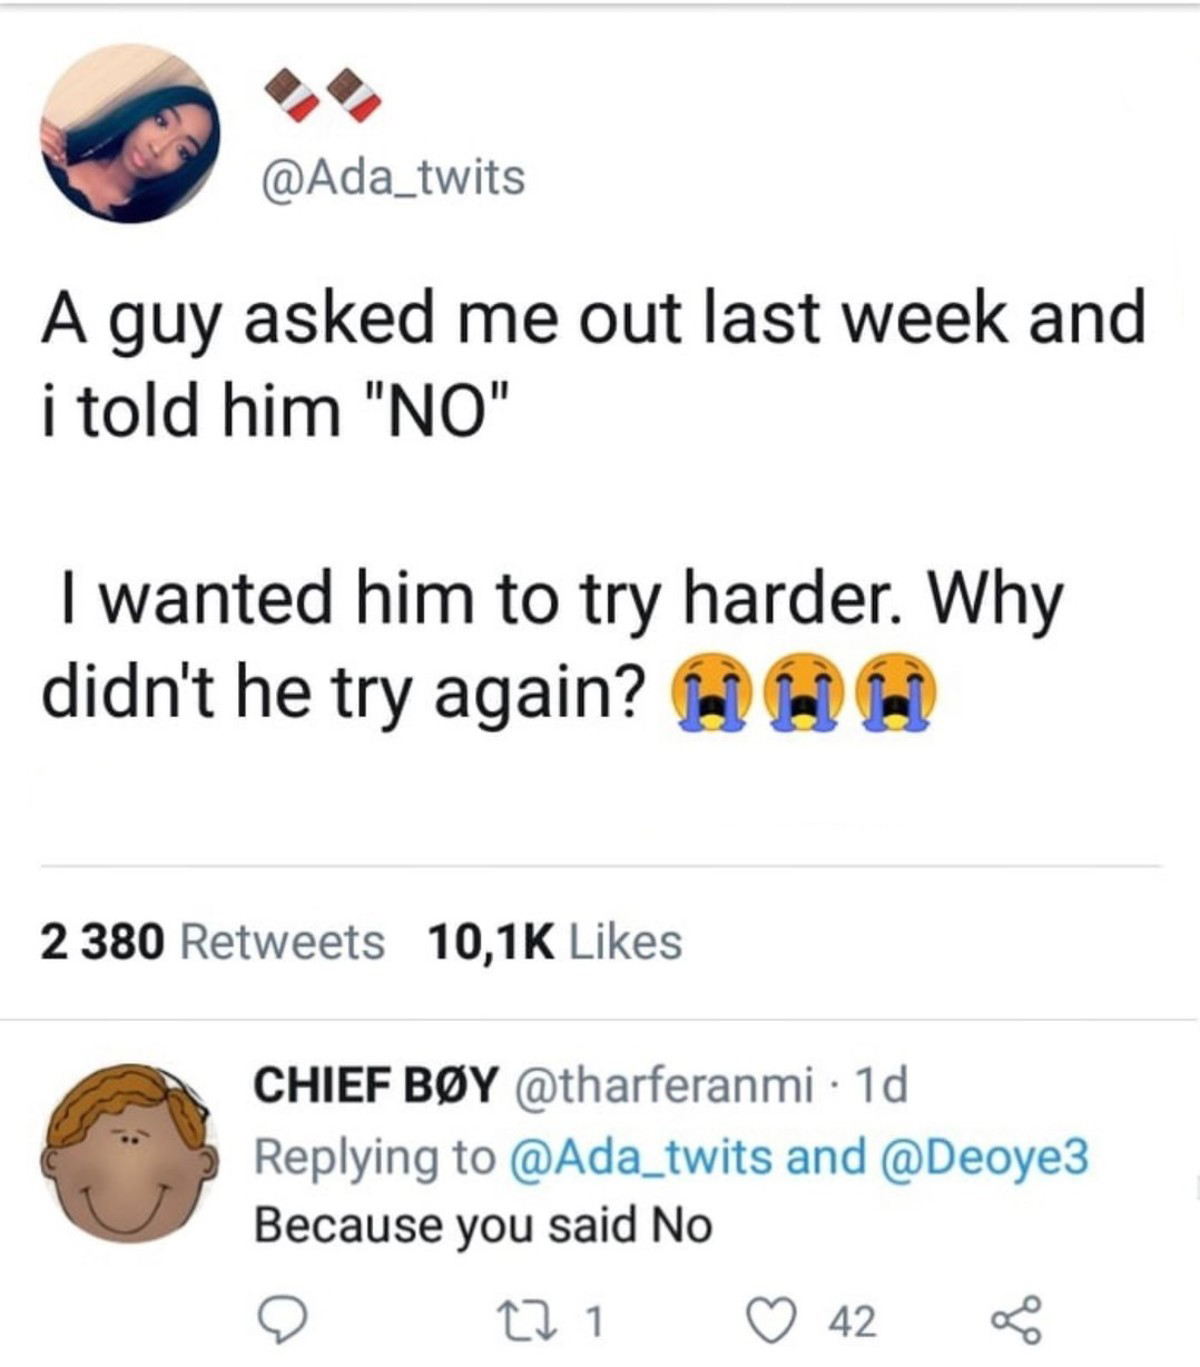 dating girl logic - A guy asked me out last week and i told him "No" I wanted him to try harder. Why didn't he try again? aan 2 380 Chief By 1d and Because you said No 2 221 42